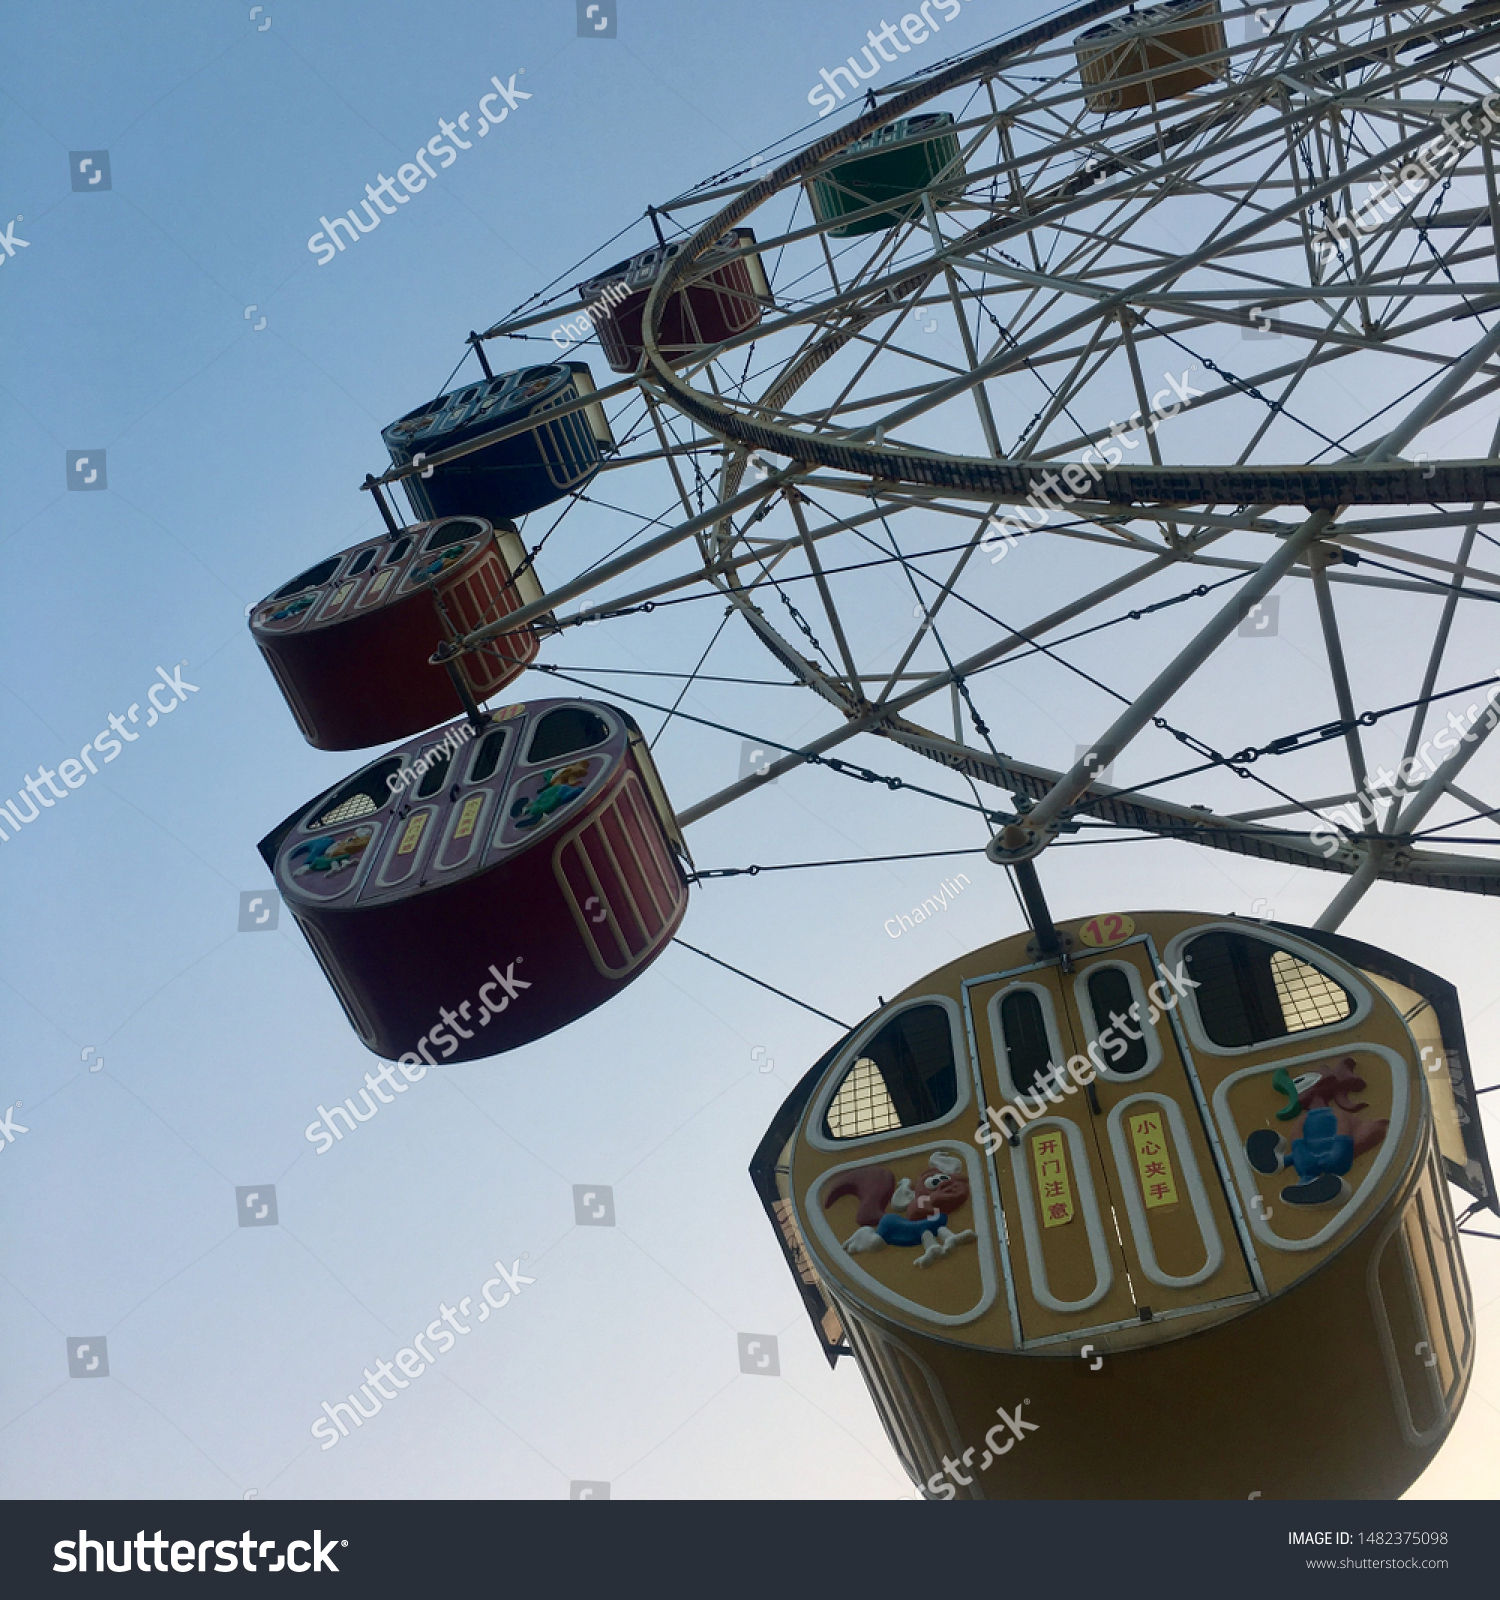 The ferris wheel goes round and round #1482375098